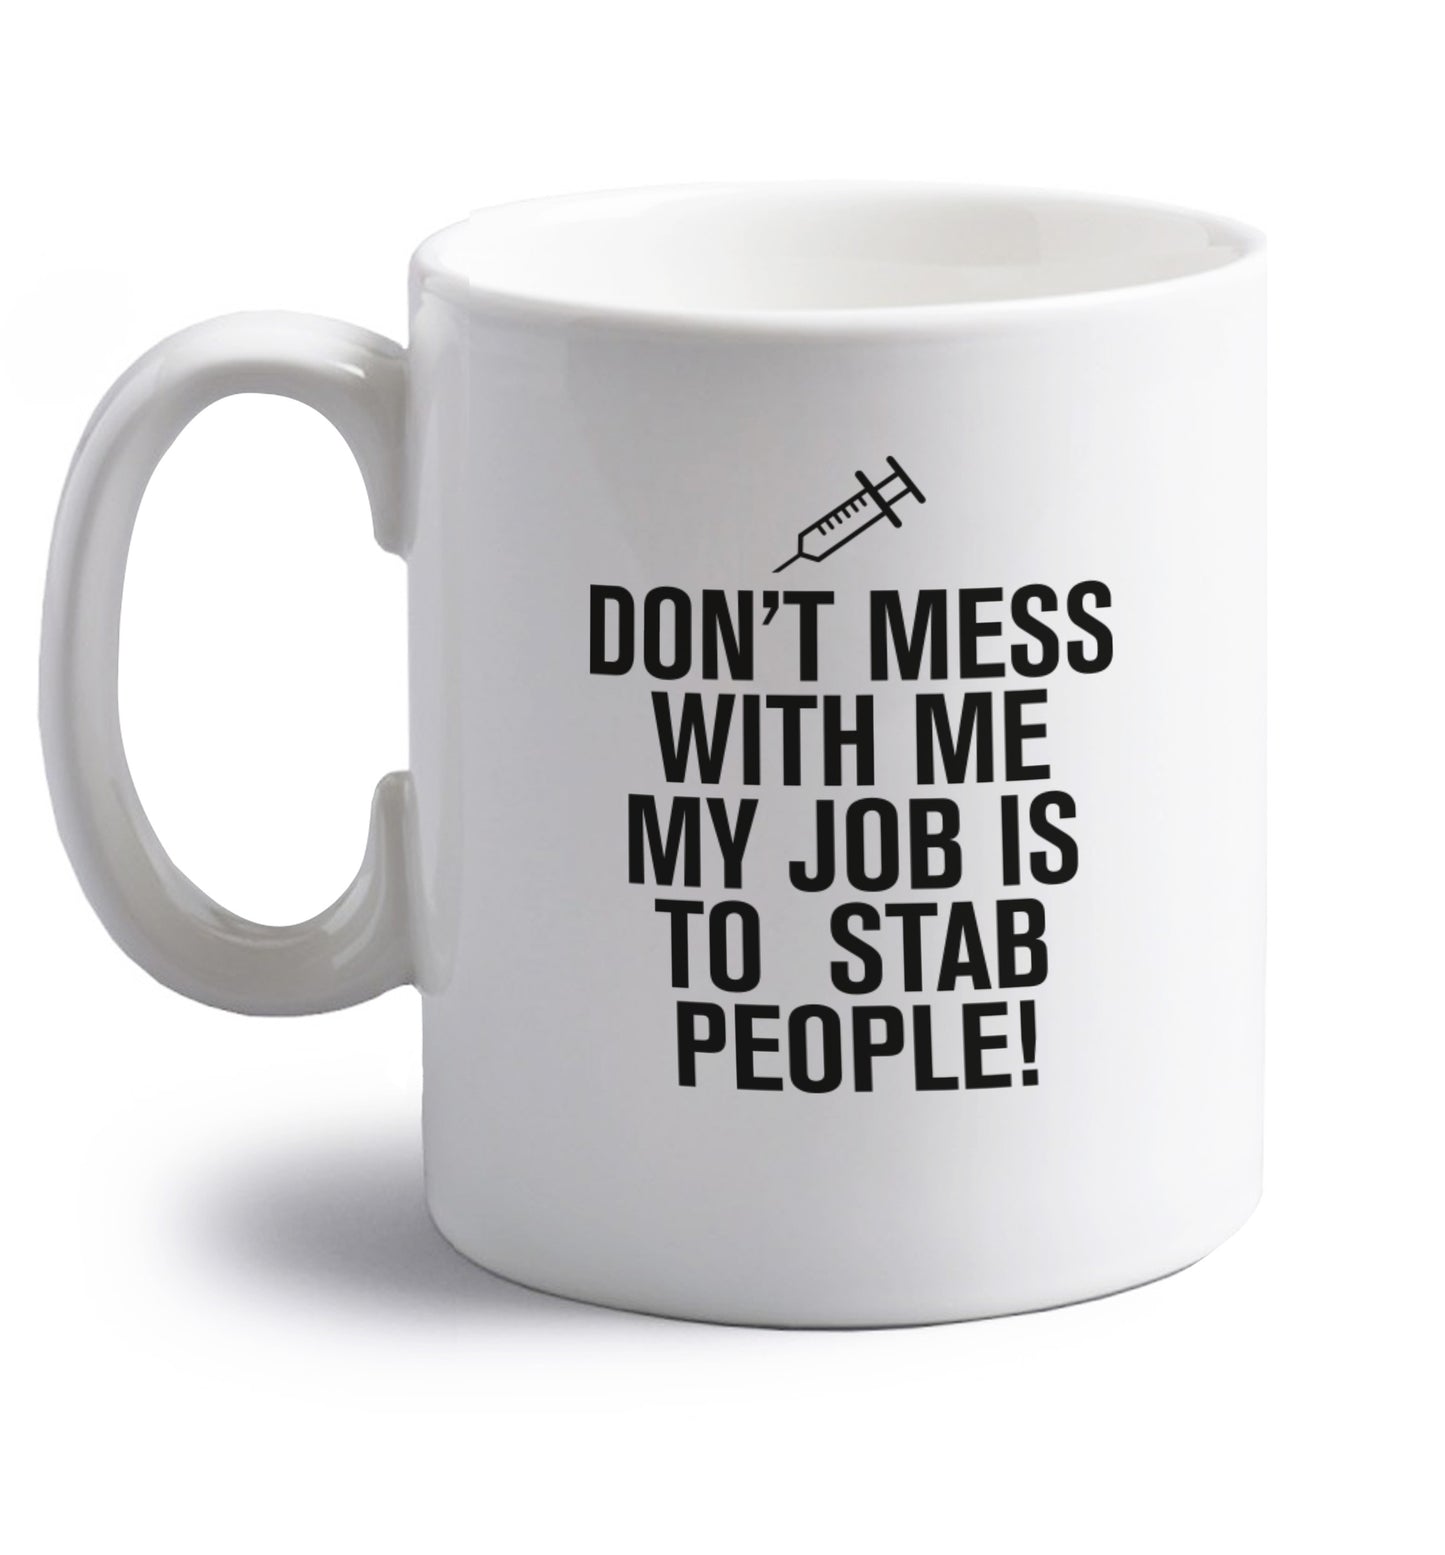 Don't mess with me my job is to stab people! right handed white ceramic mug 